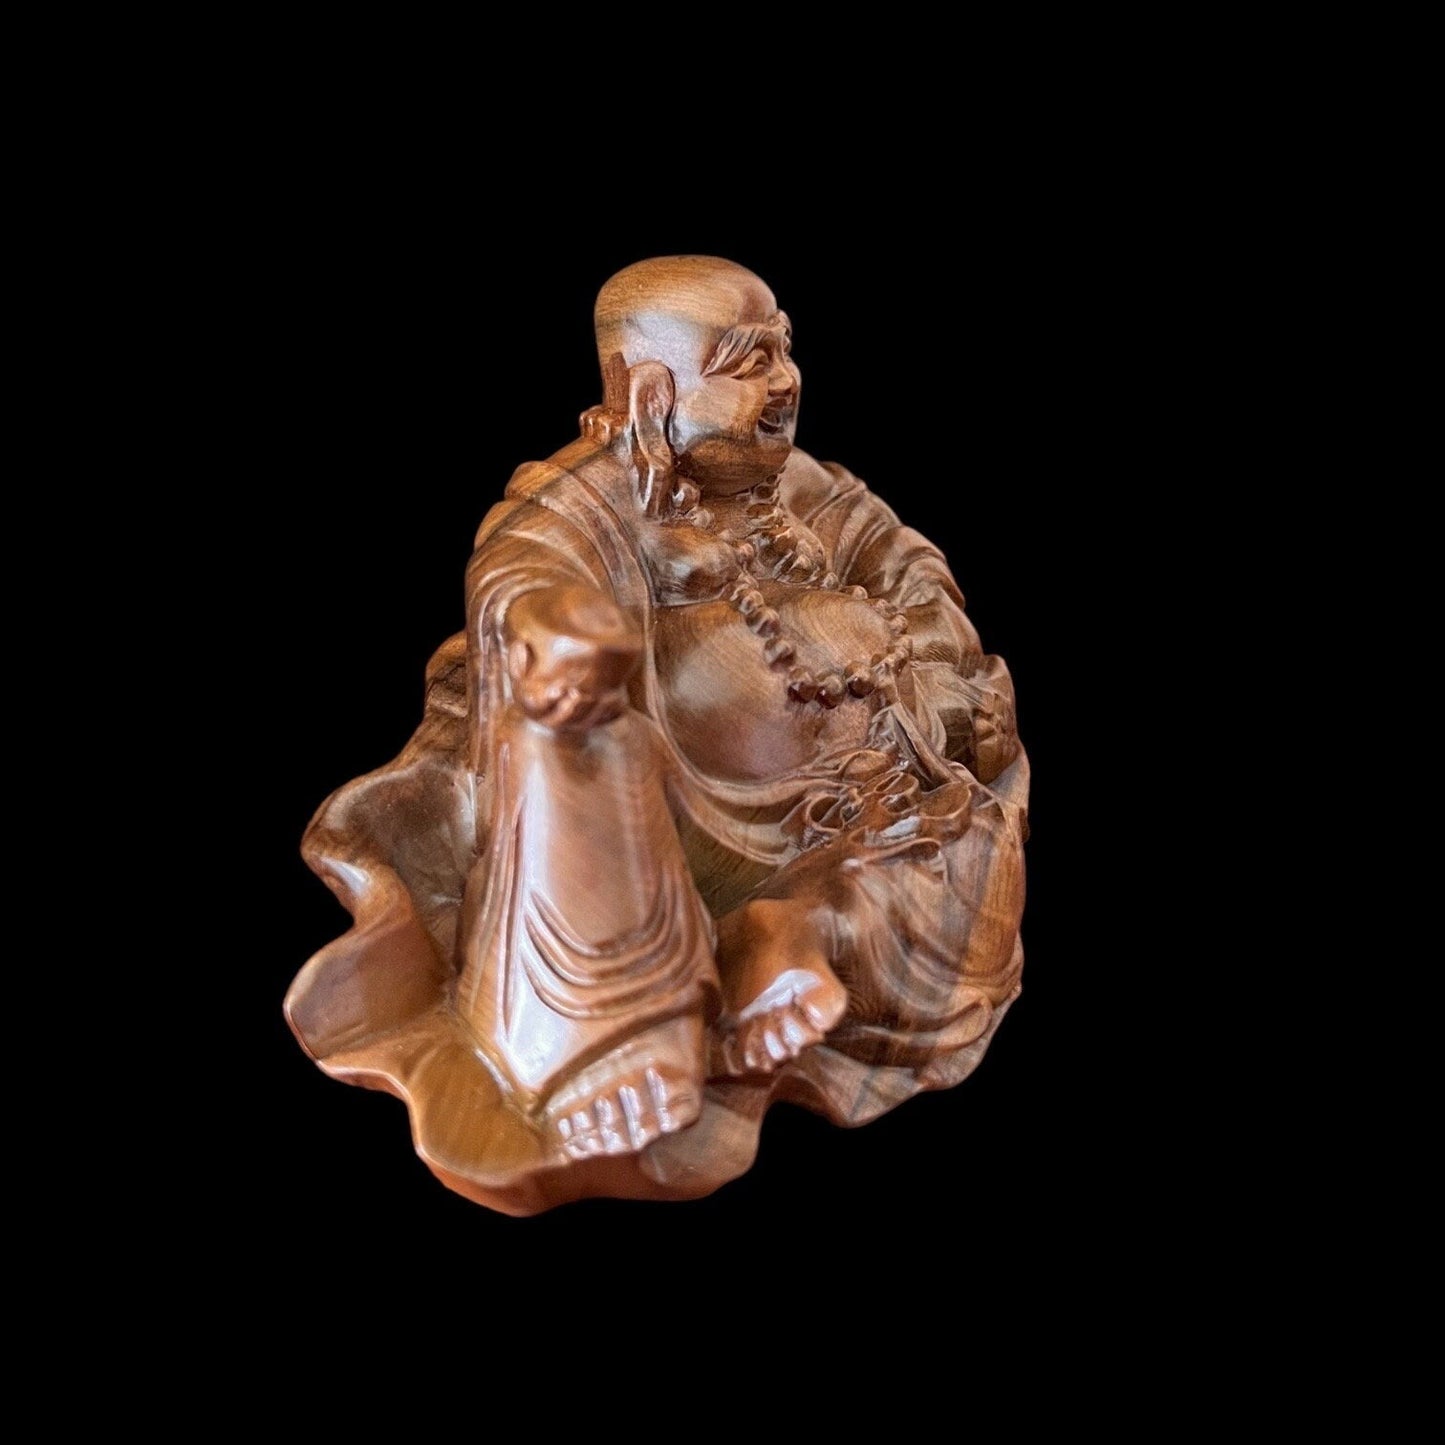 God of Wealth Fragrant Wood Statue, Smiling Maitreya Buddha, Lucky Fengshui Laughing Happy Buddha Figurine Brings FortuneTuNaCraftCollection